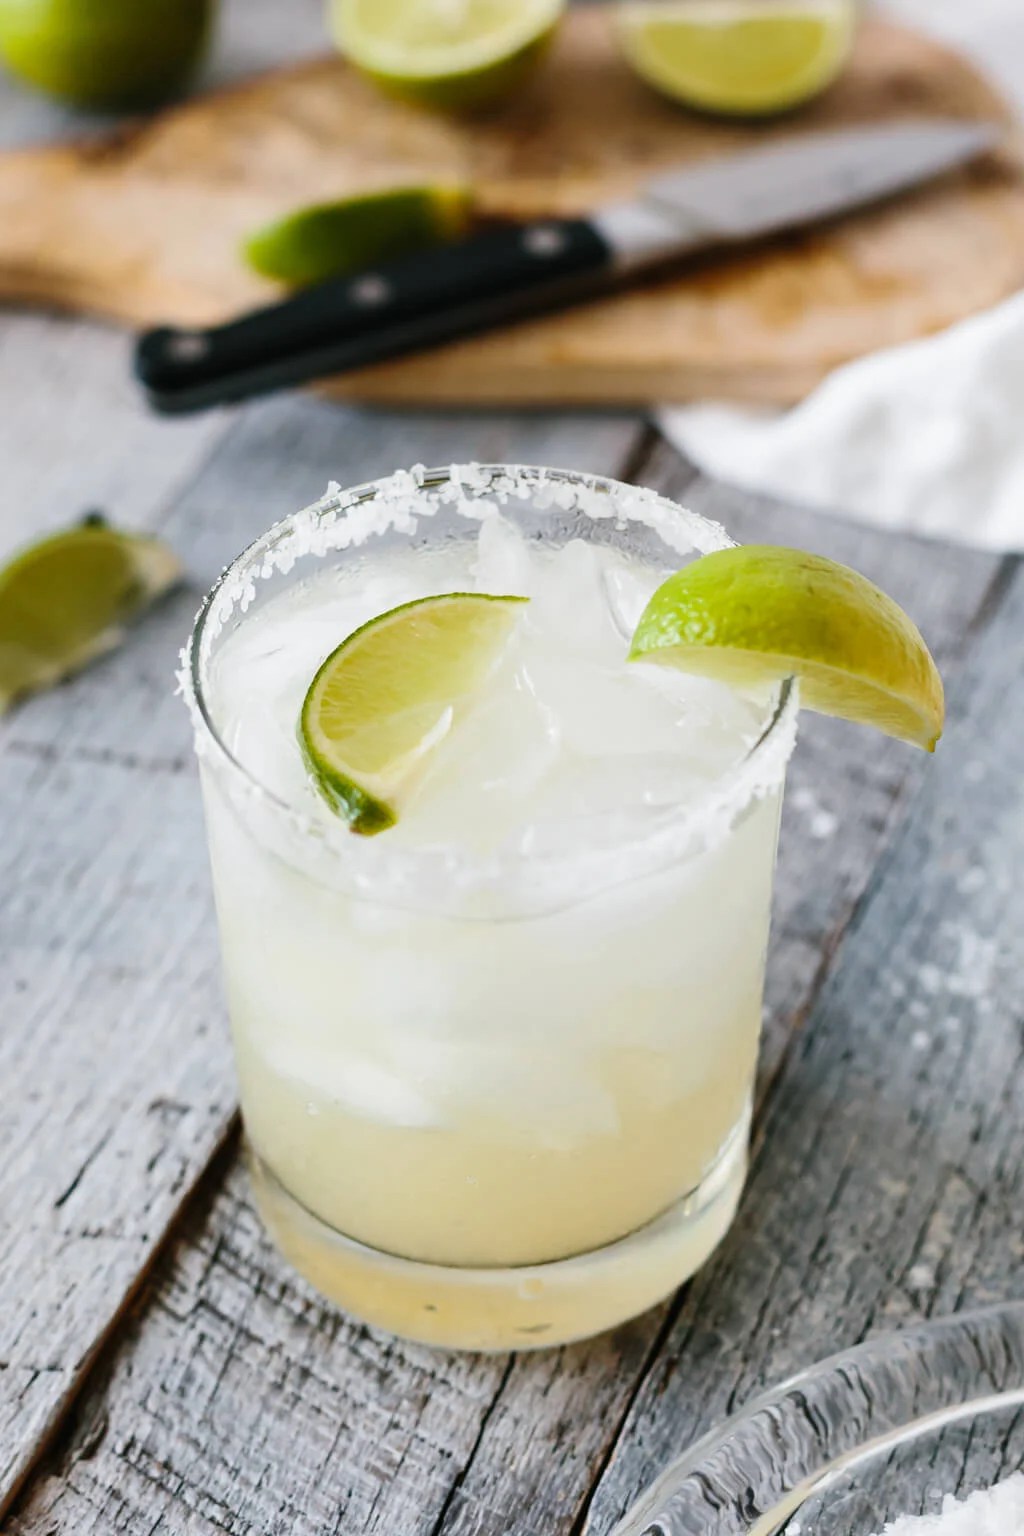 Margarita in a glass with limes on top and in the background.